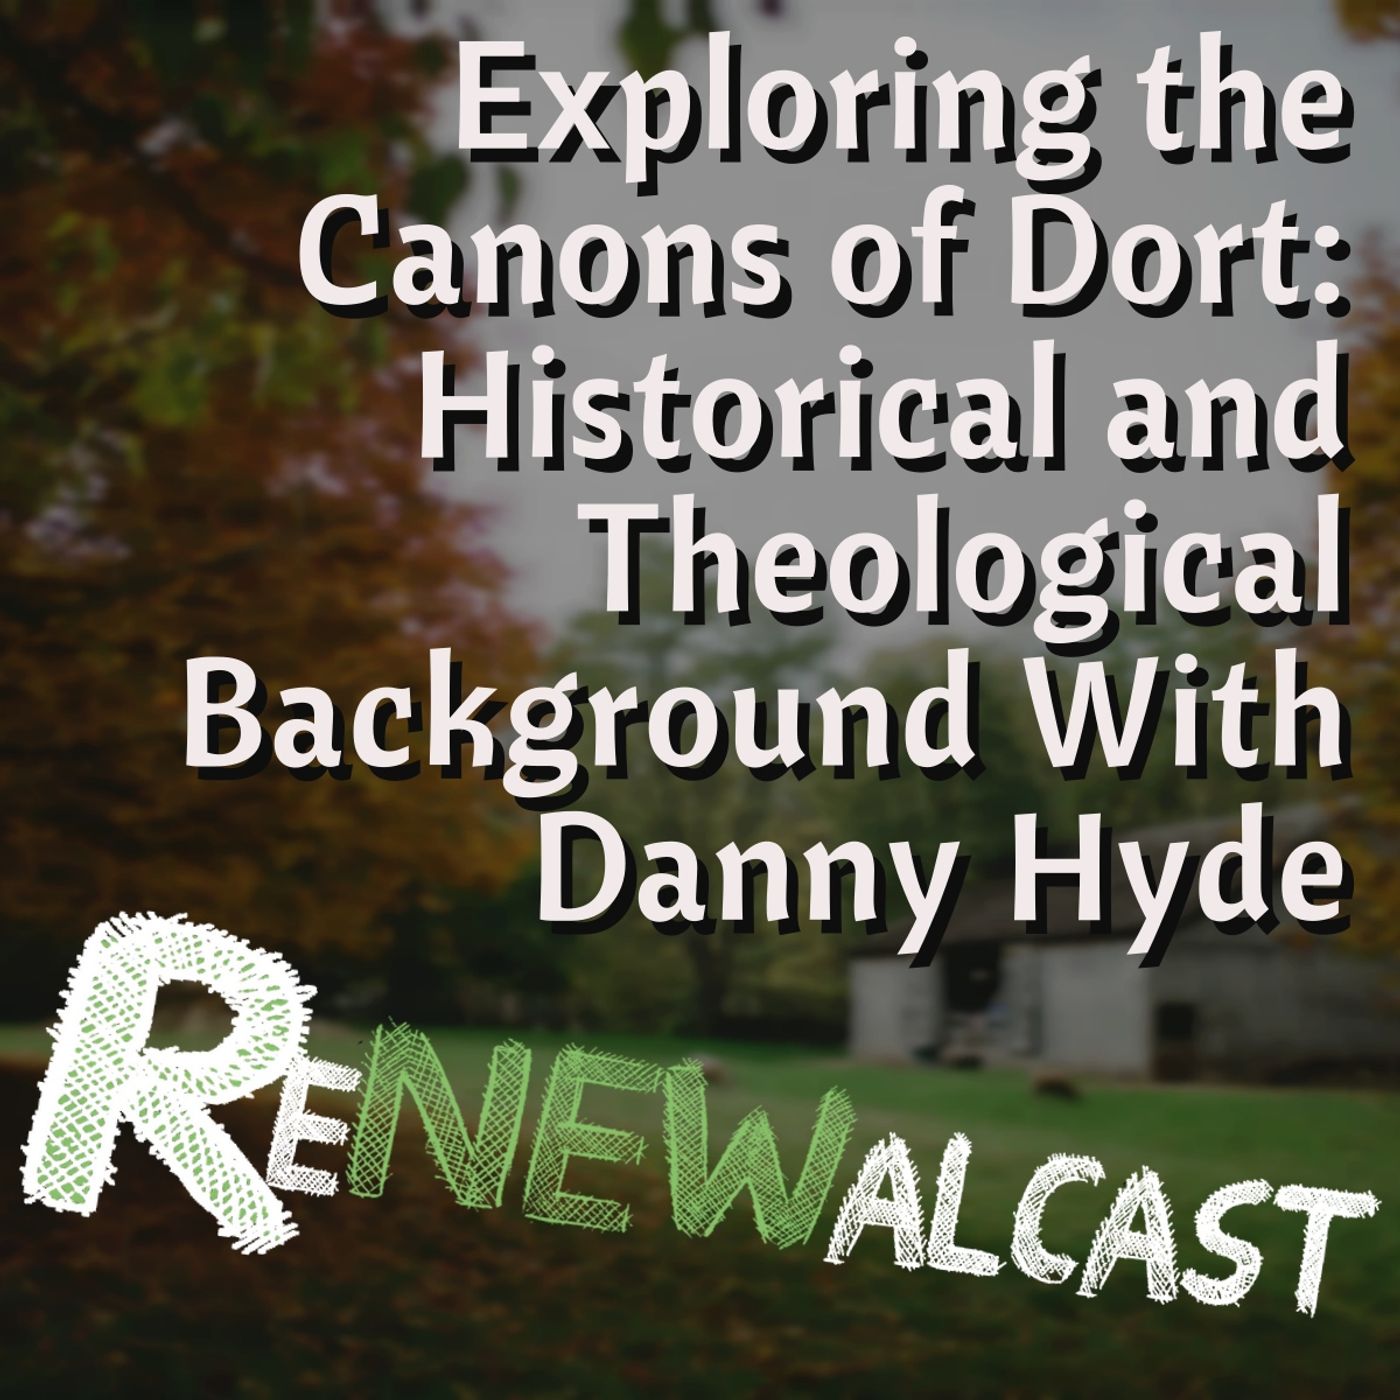 Exploring the Canons of Dort: Historical and Theological Background (Part 1)